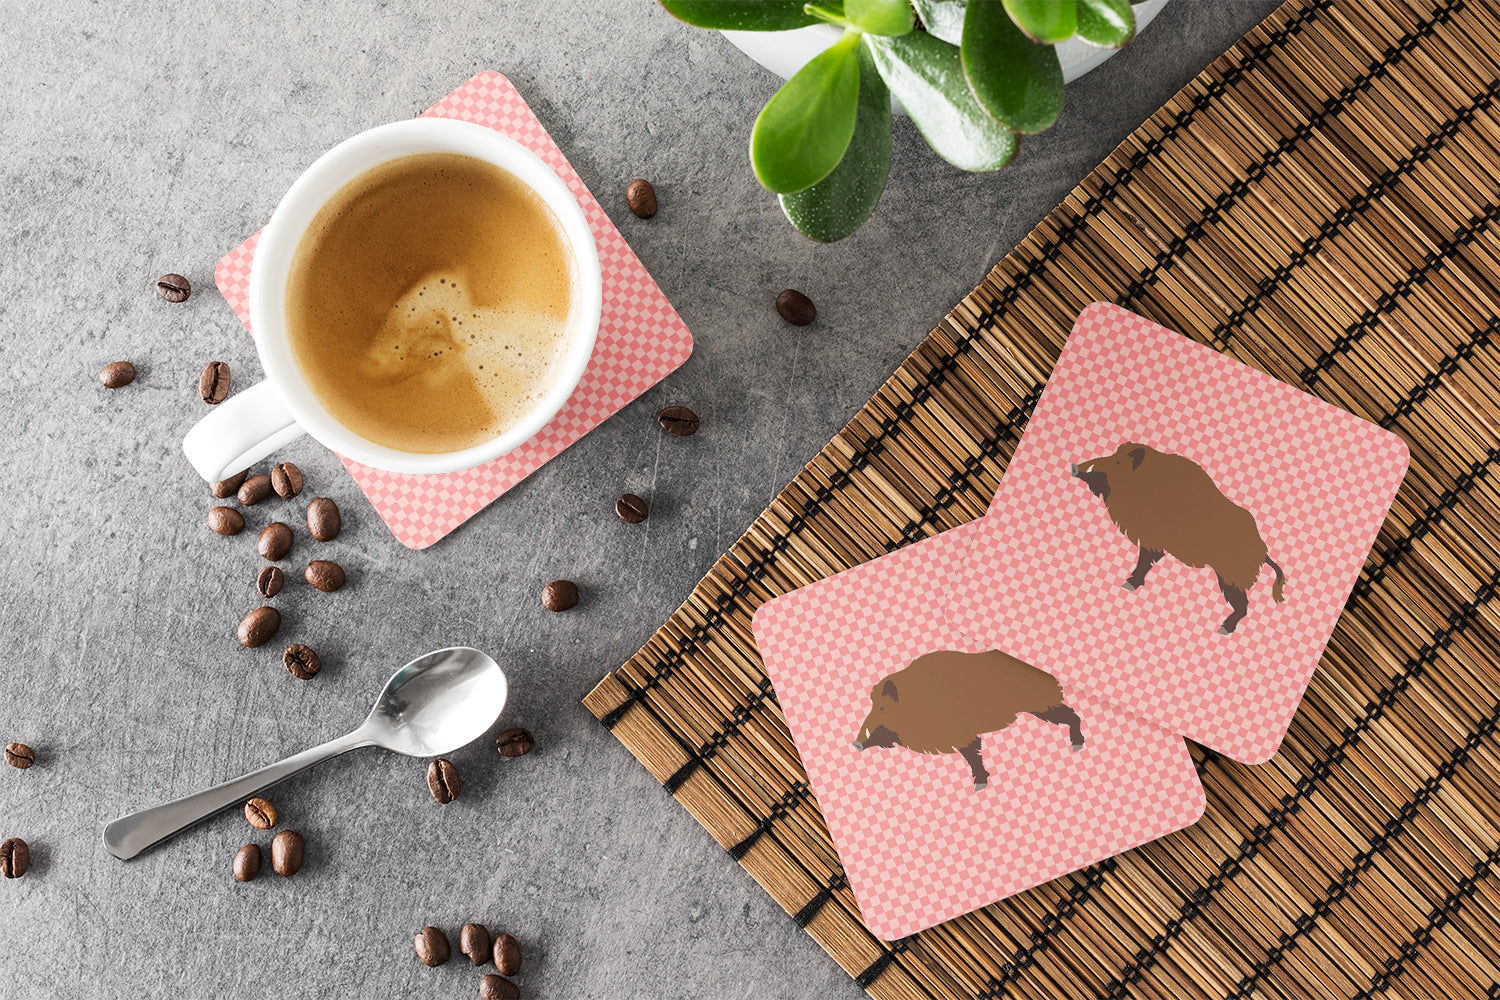 Wild Boar Pig Pink Check Foam Coaster Set of 4 BB7936FC - the-store.com